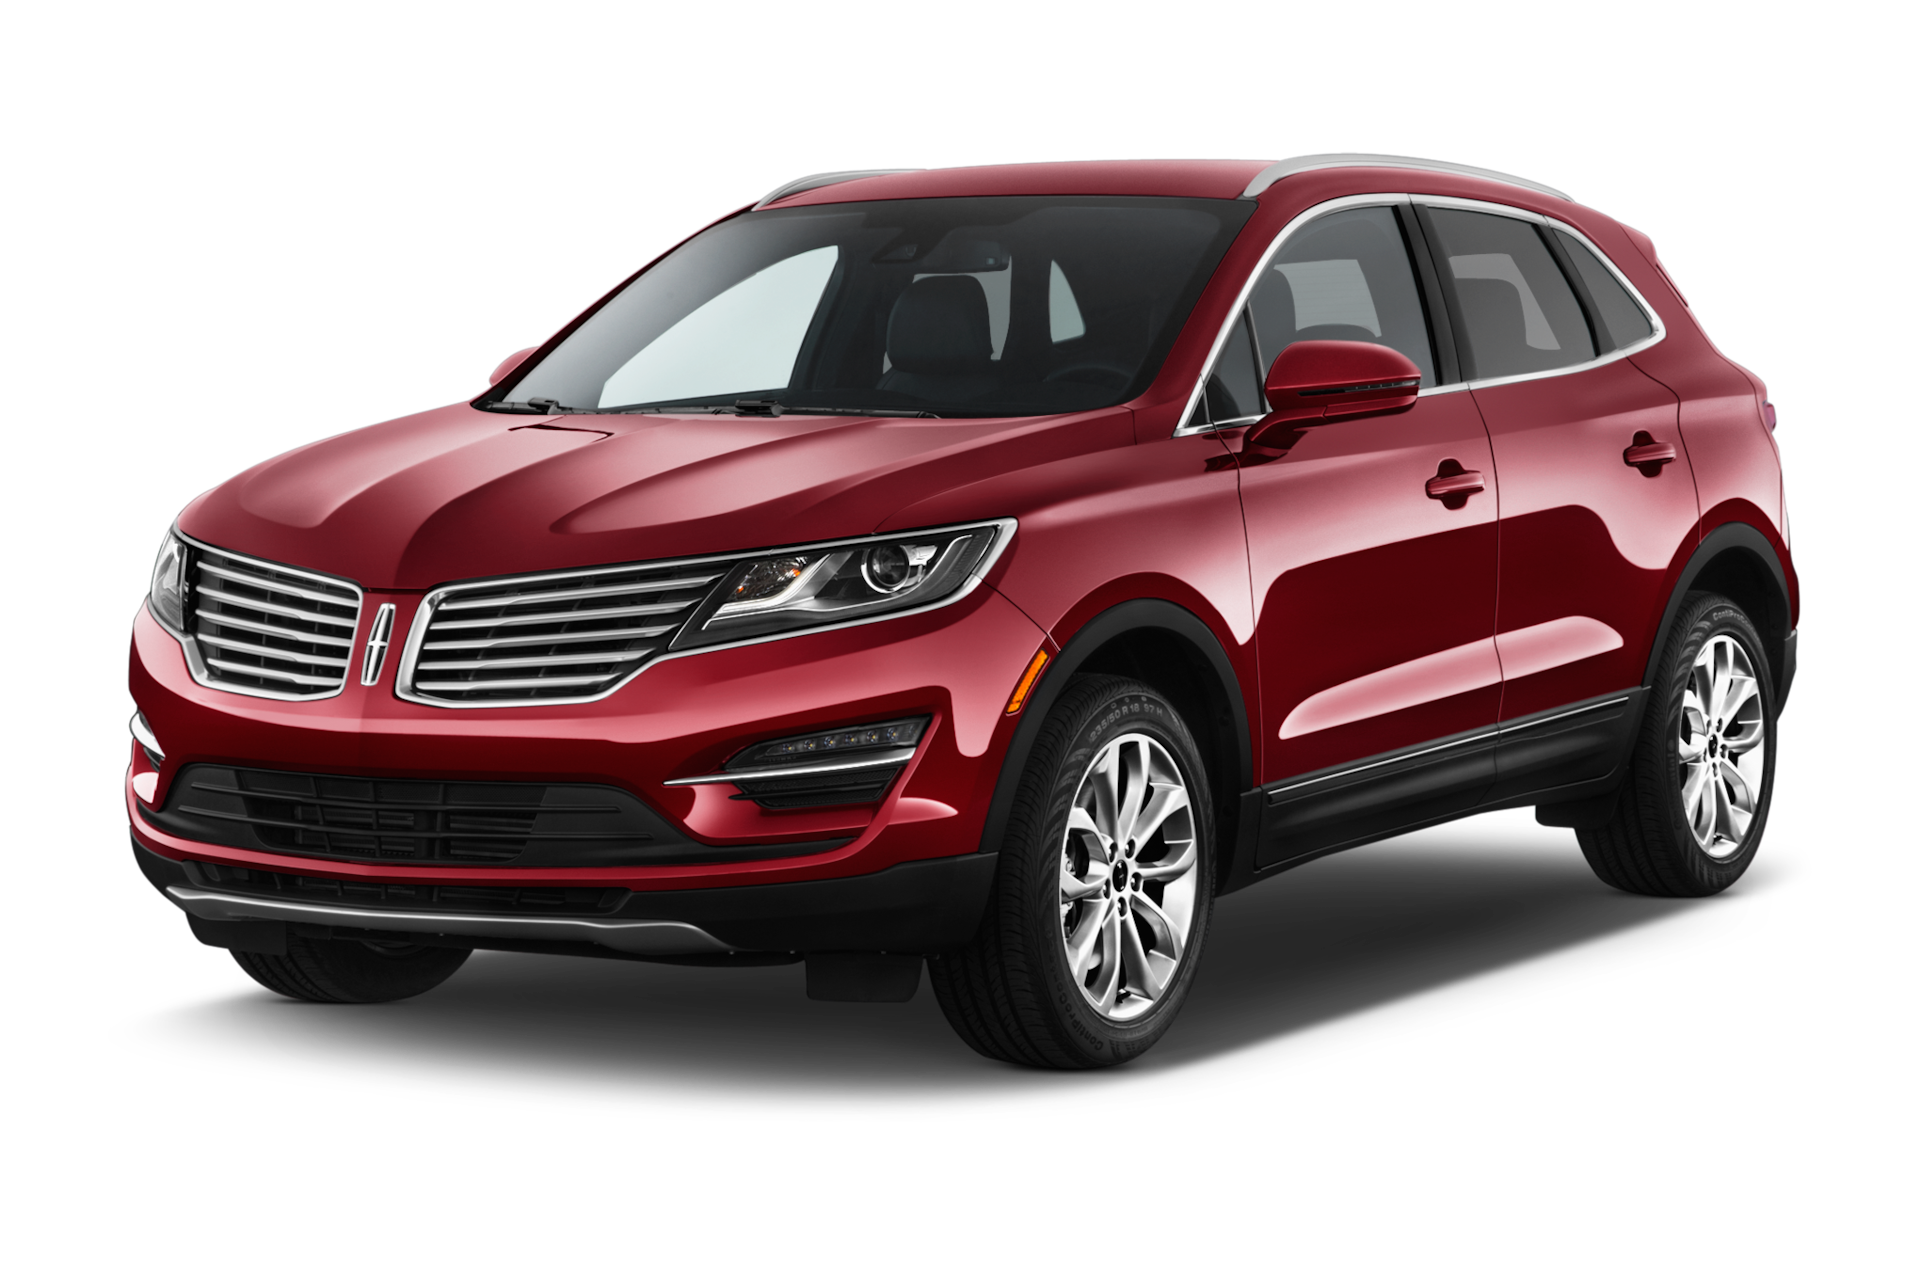 2018 Lincoln MKC Prices, Reviews, and Photos - MotorTrend